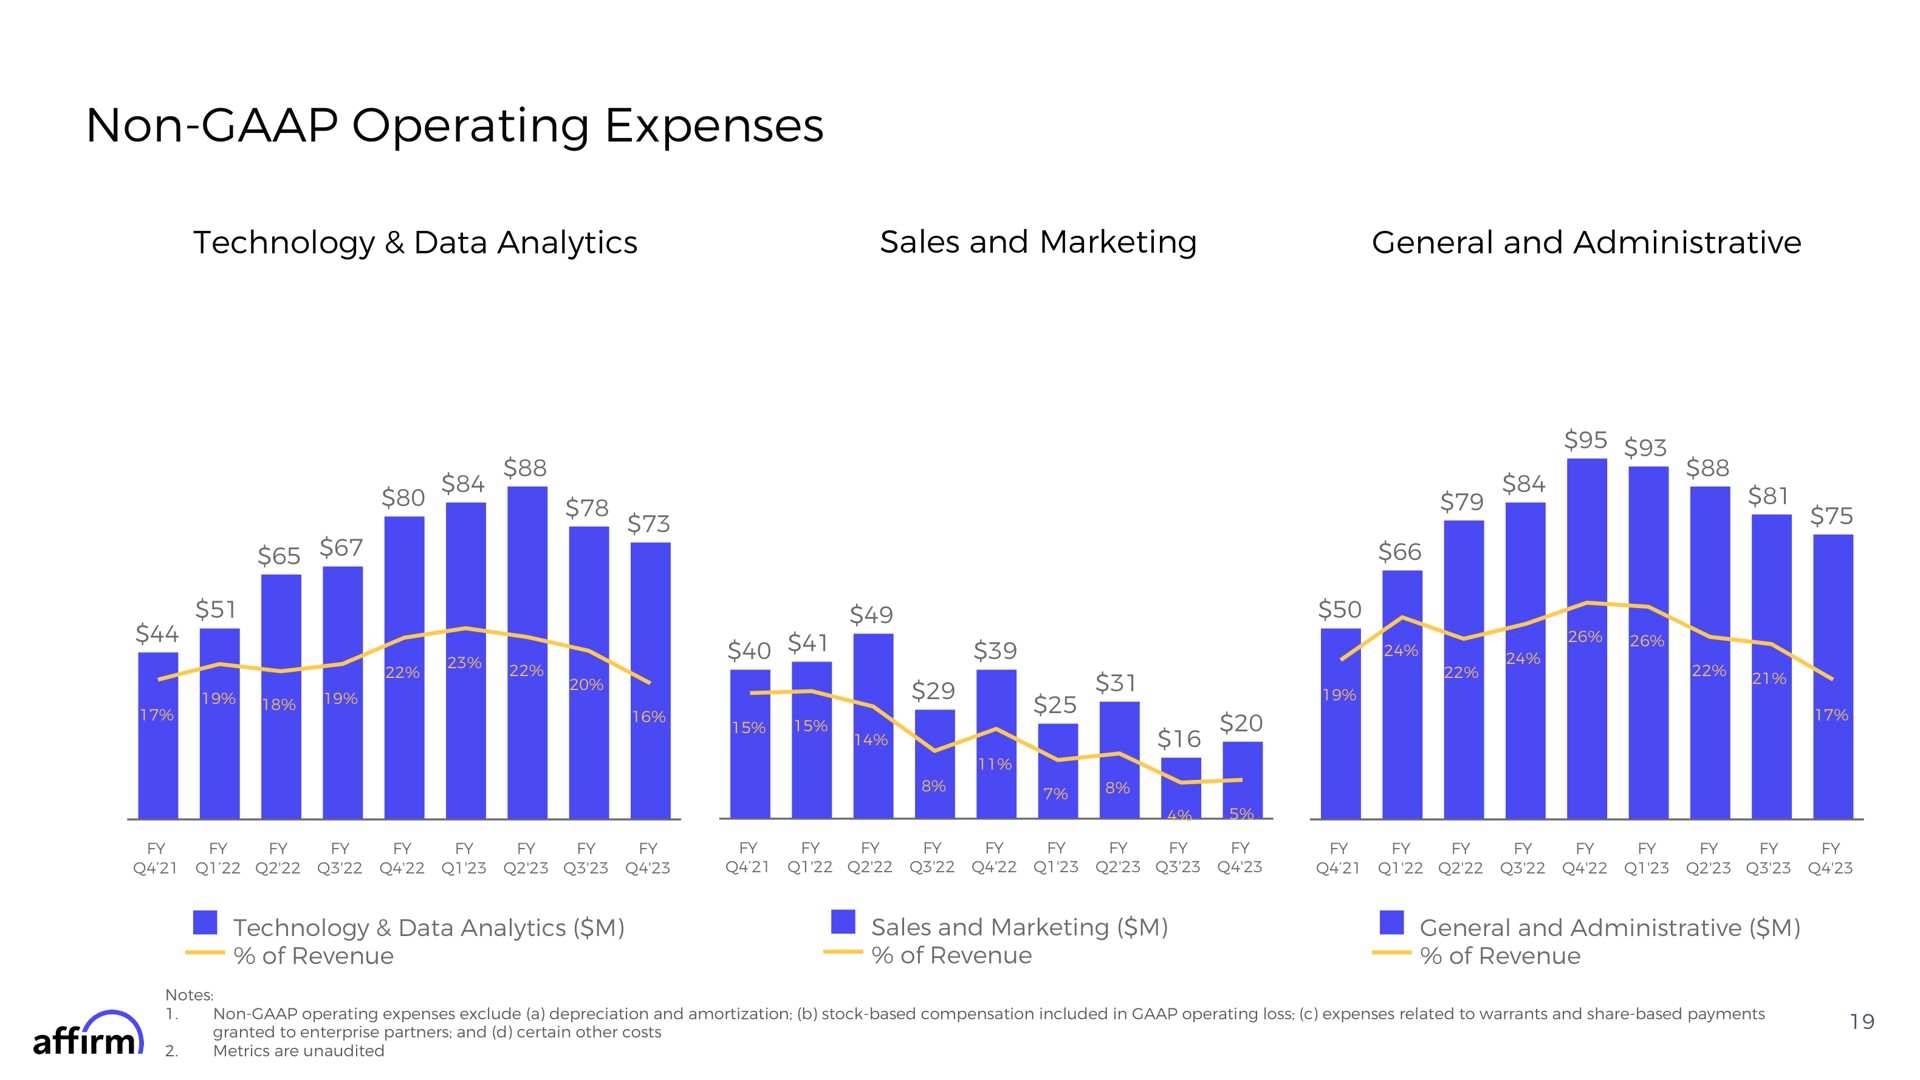 non operating expenses technology data analytics sales and marketing general and administrative | Affirm